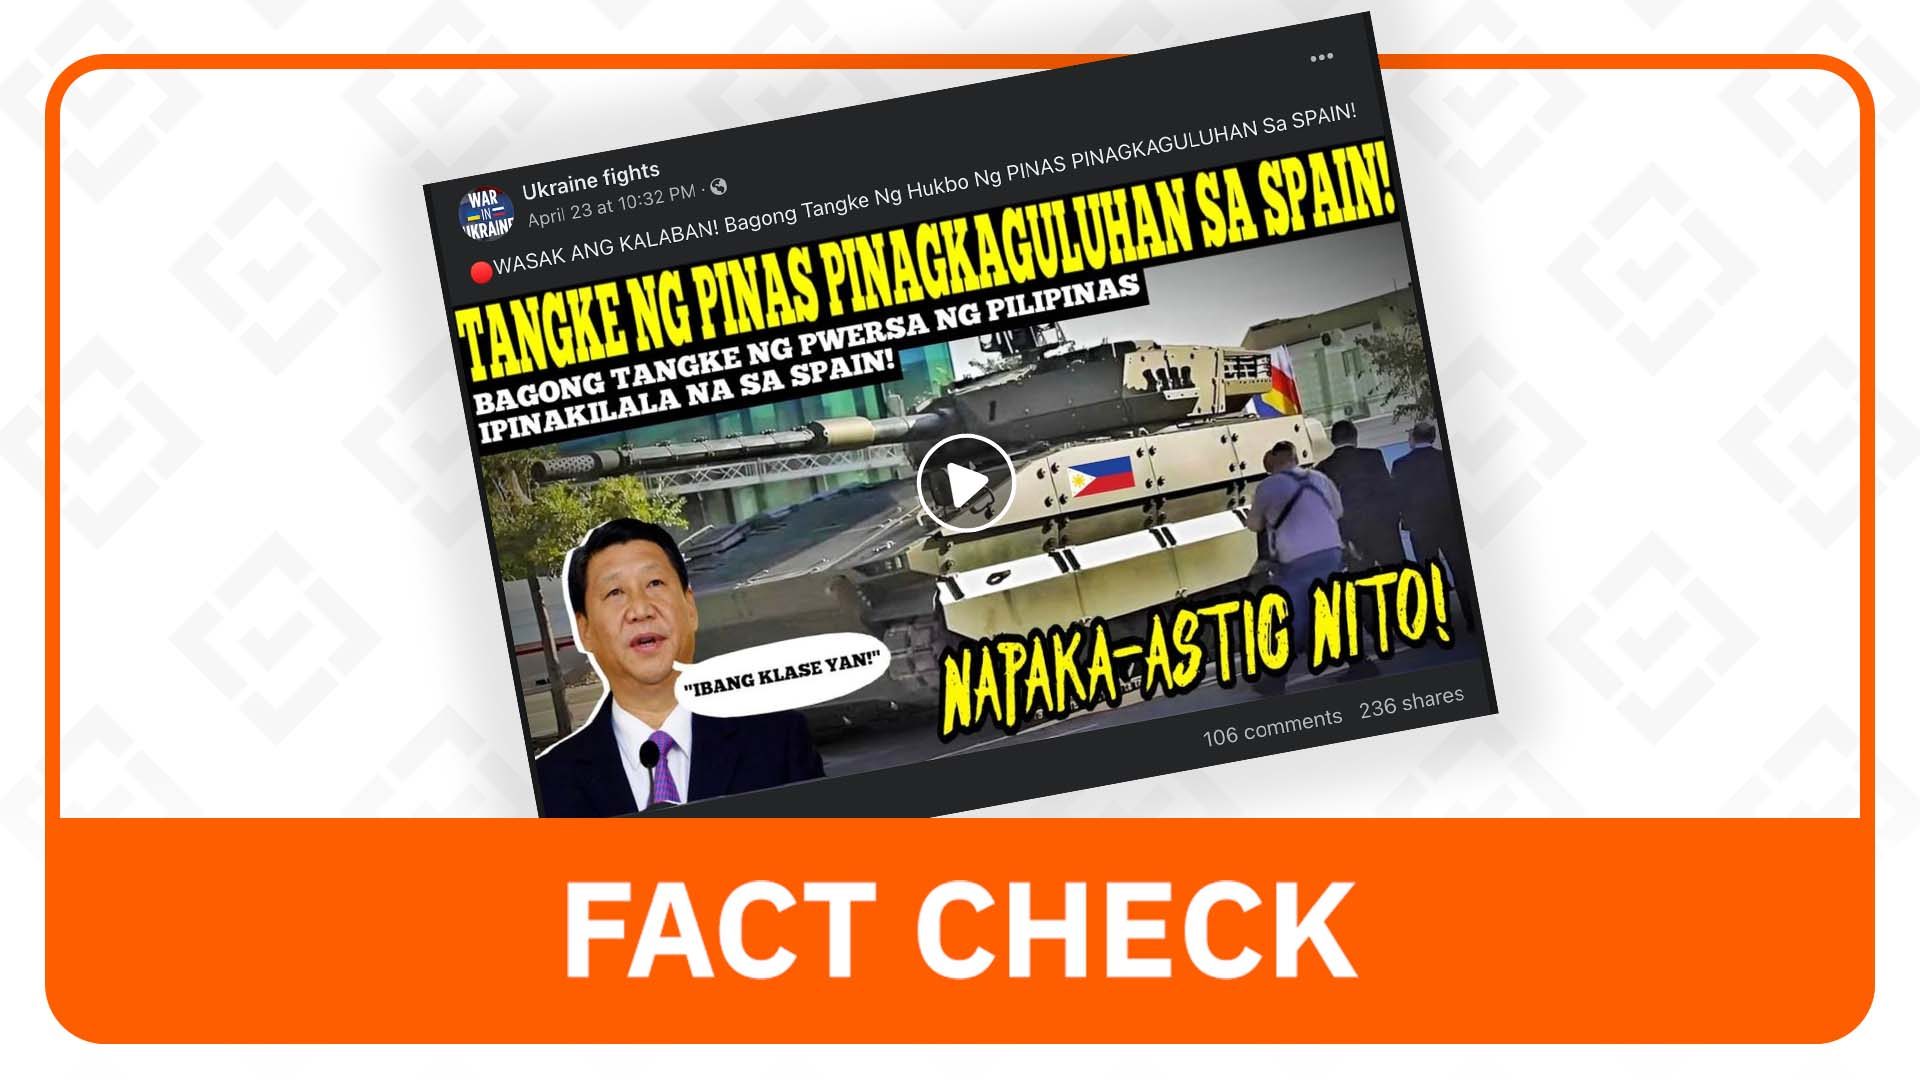 FACT CHECK: Photo misrepresents Philippine Army tanks supposedly on display in Spain